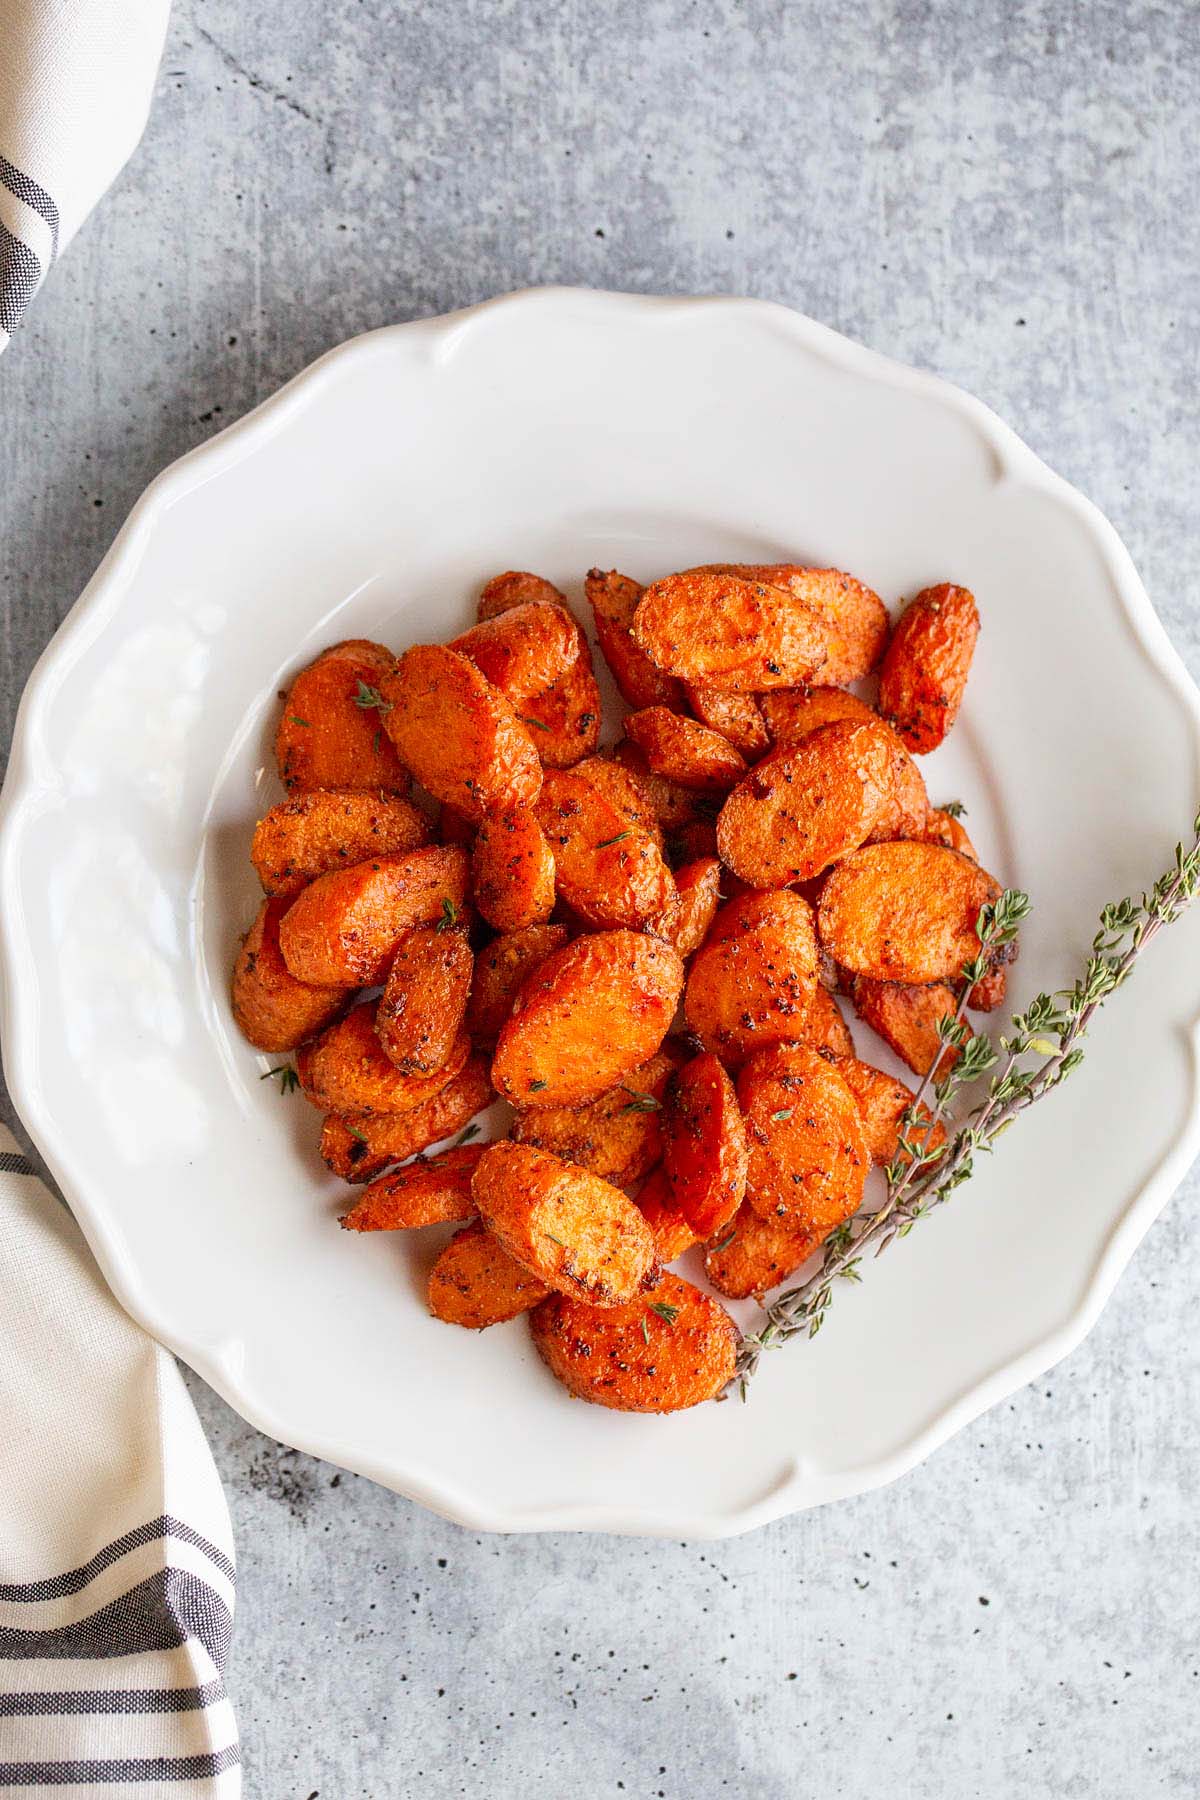 roasted carrots on a white plate.